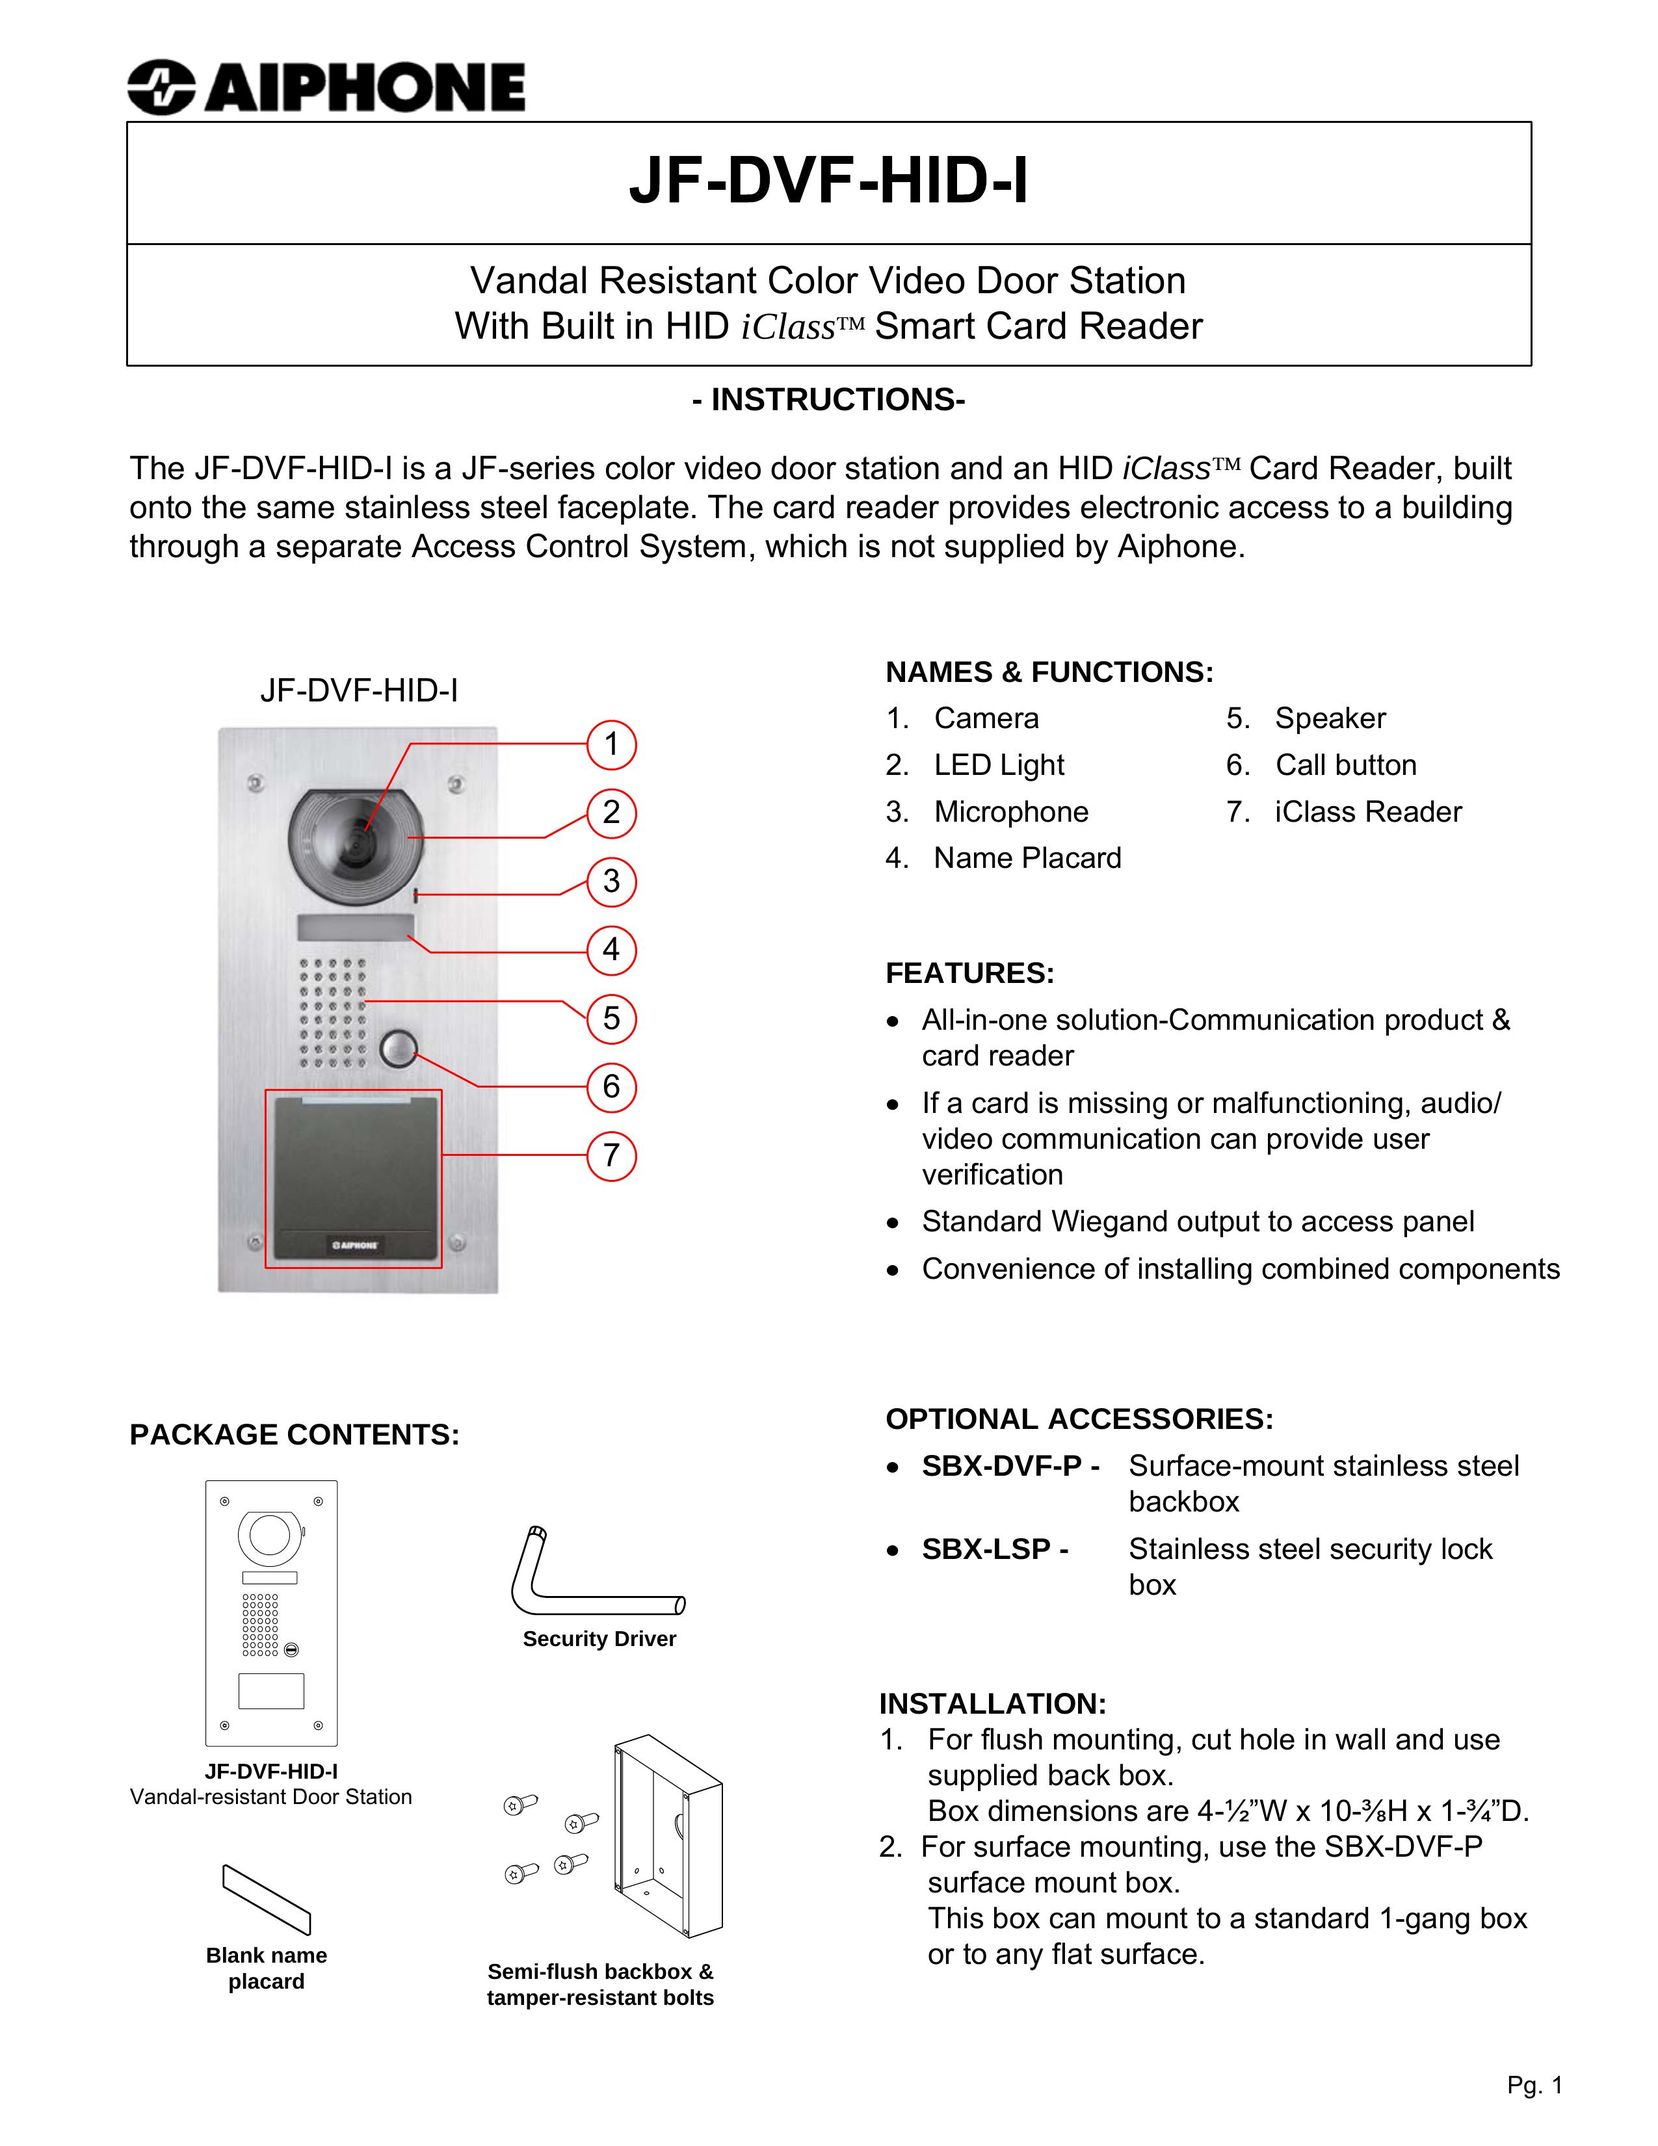 Aiphone JF-DVF-HID-I Home Security System User Manual